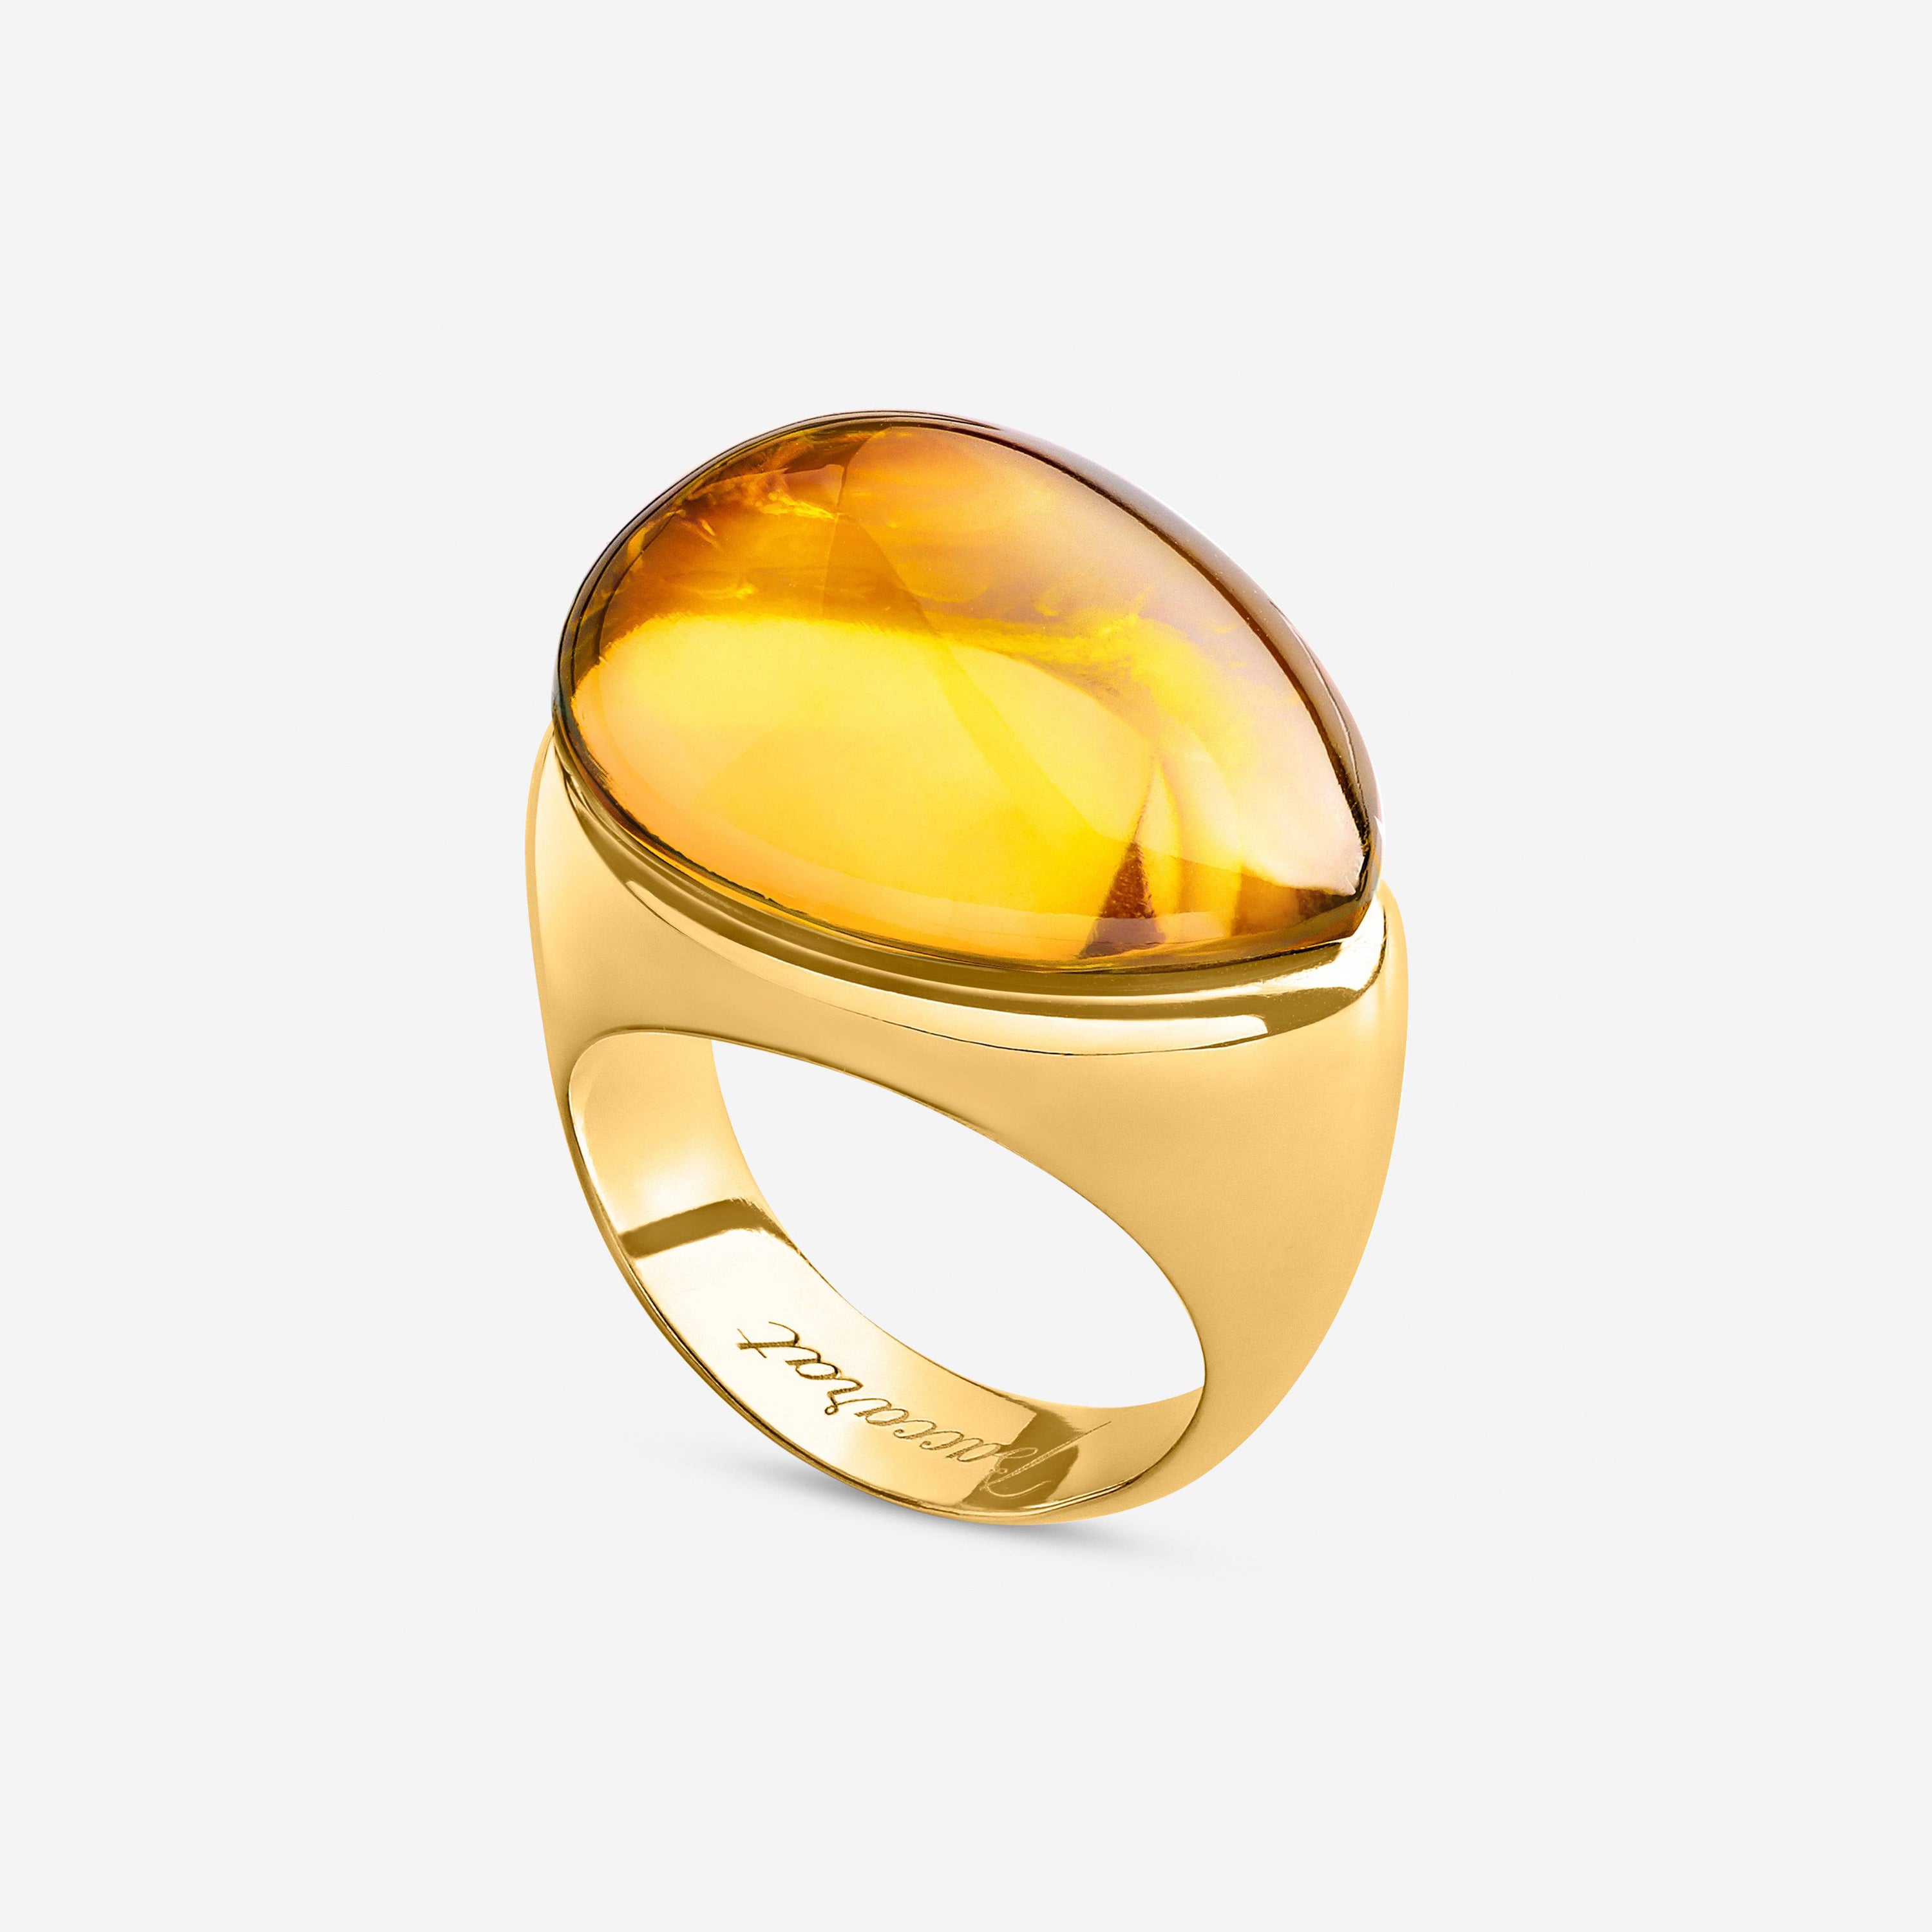 Image of Baccarat 18K Gold Plated on Sterling Silver, Honey Crystal Statement Ring